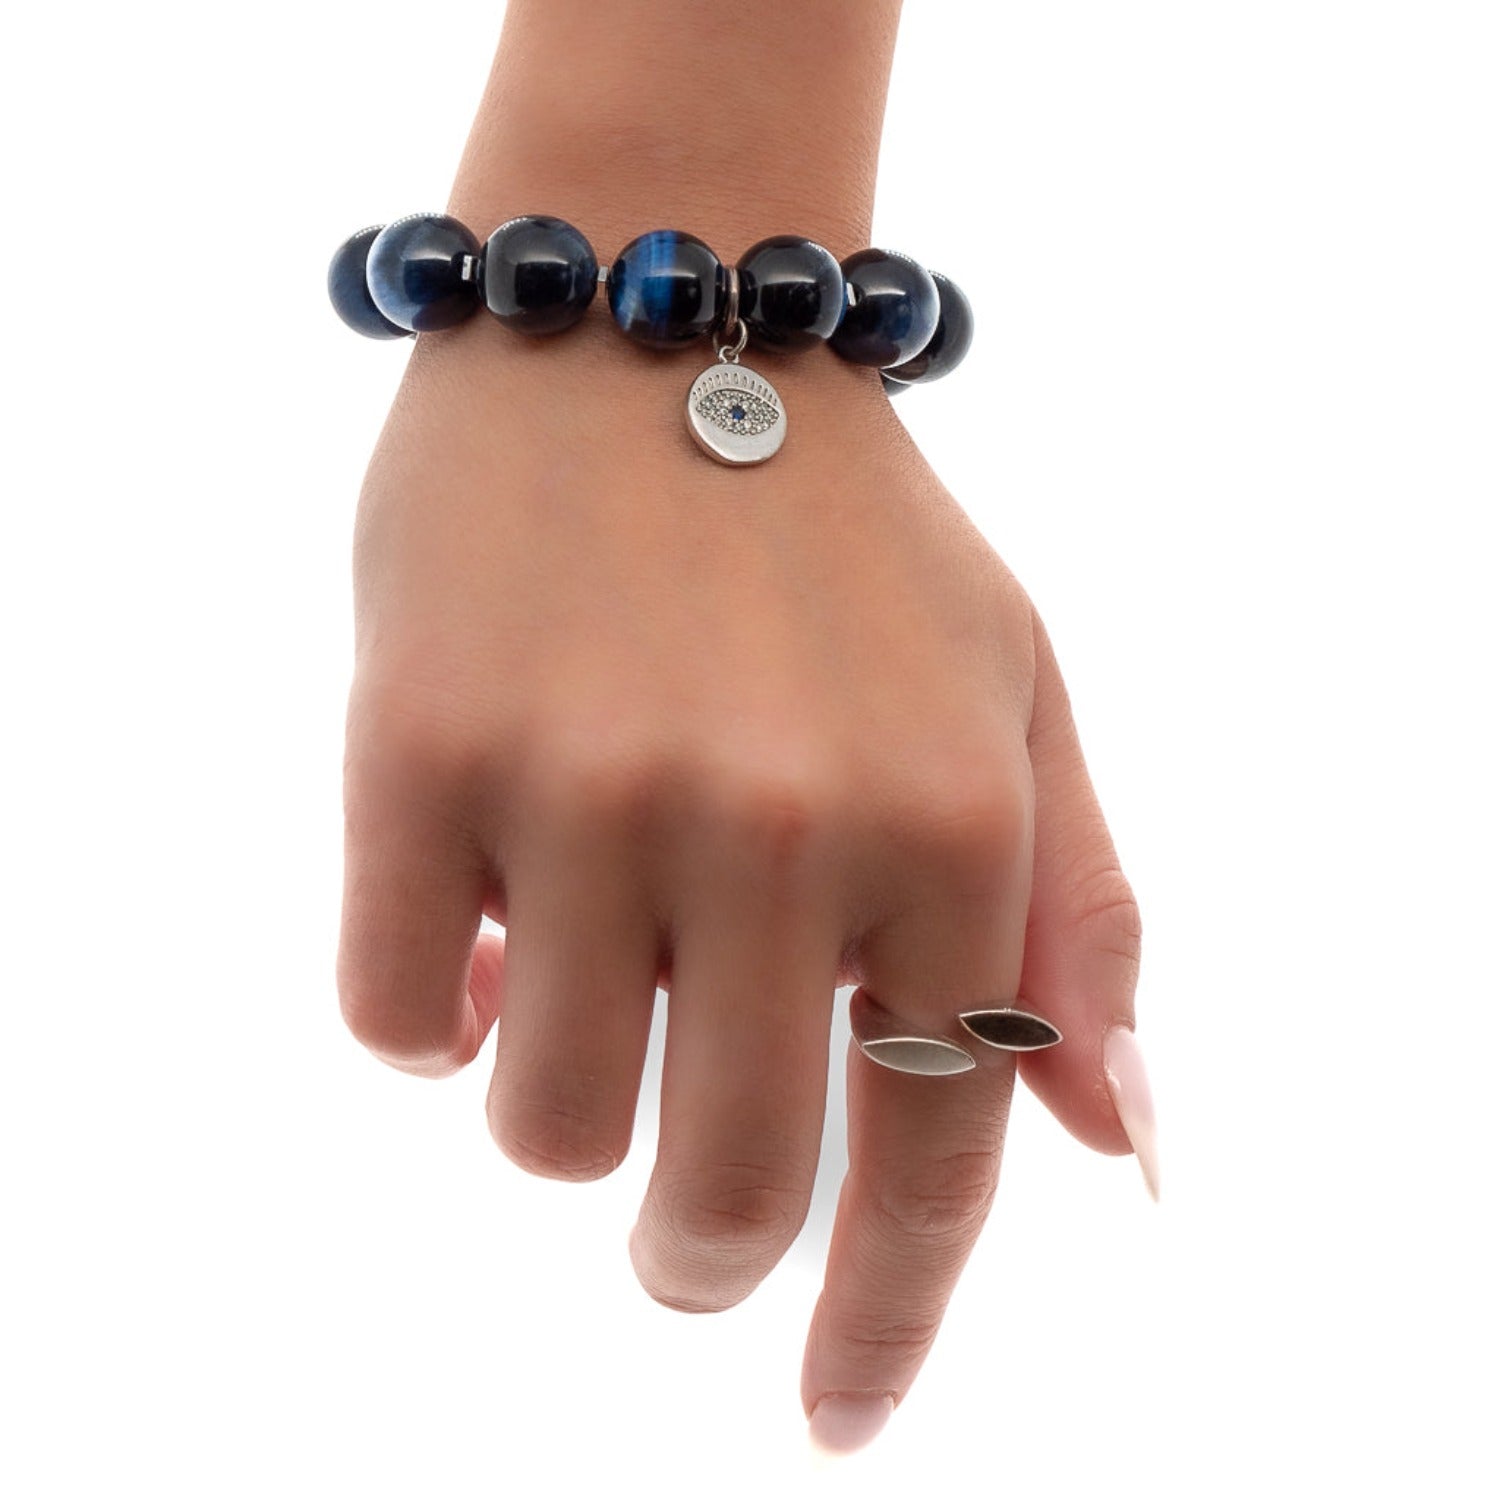 The model's wrist is adorned with the striking Power Of Eye Bracelet, a perfect accessory to make a statement.